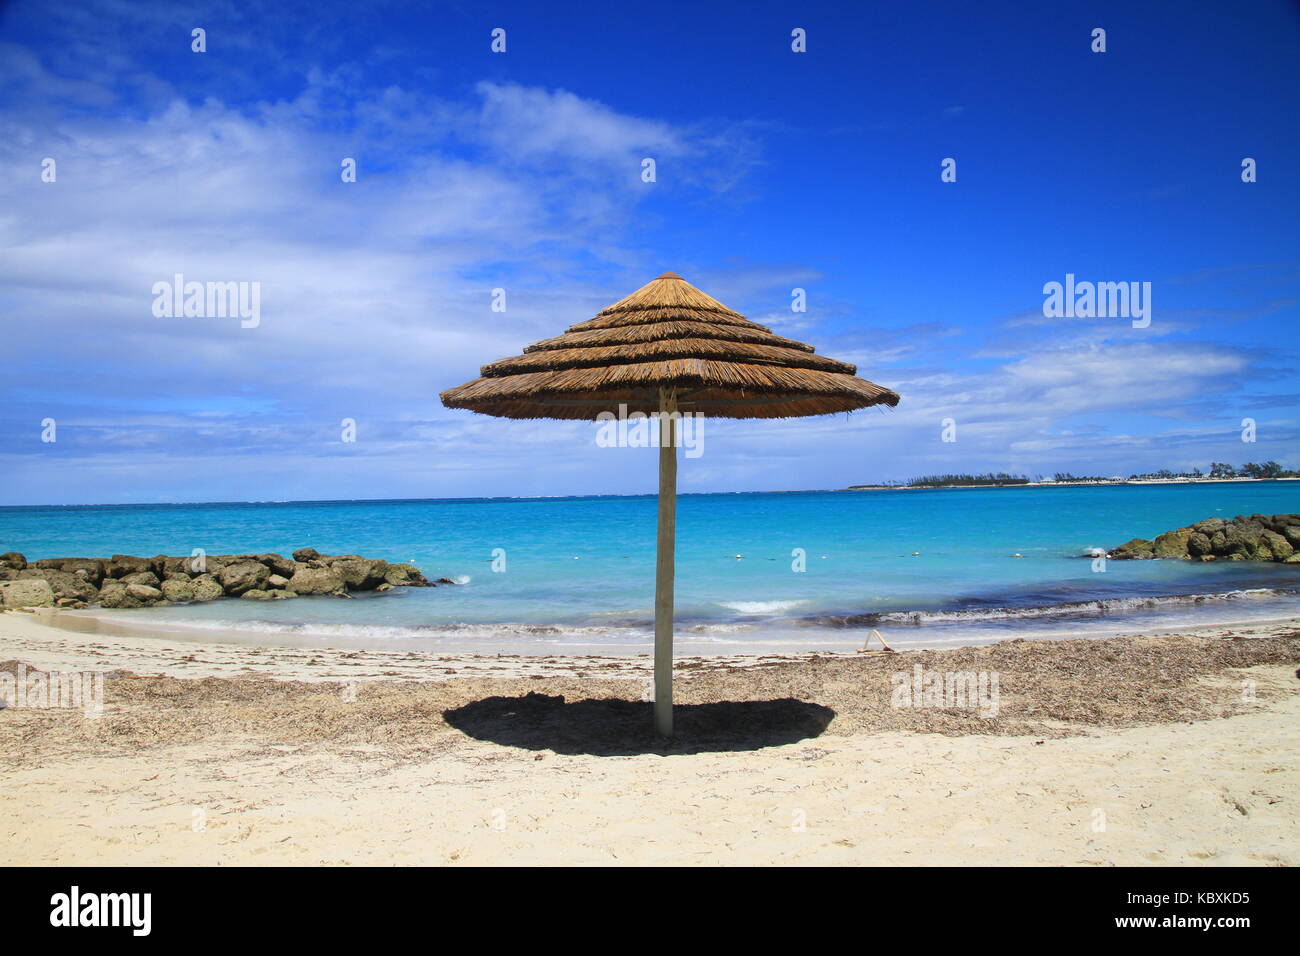 Luxury vacation on a beach with beautiful crystal blue water Stock Photo